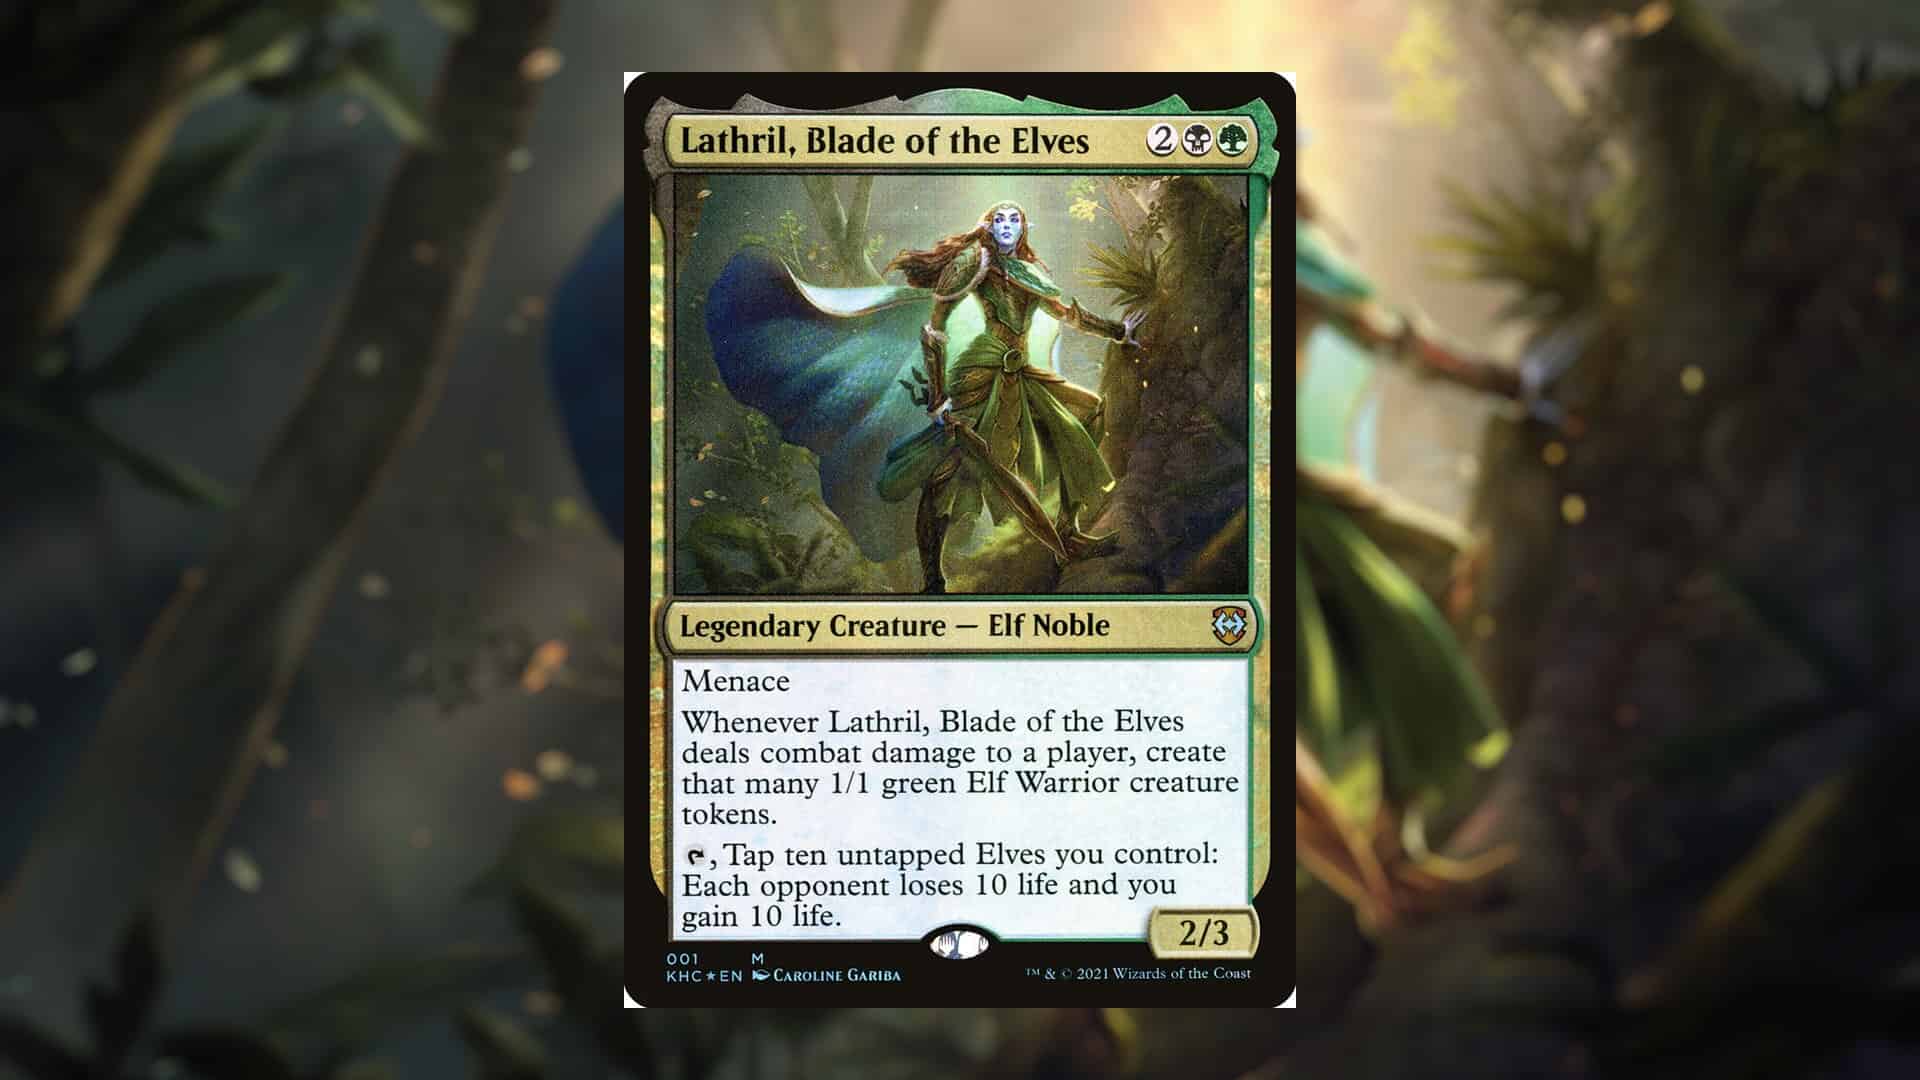 Picture of Lathril, Blade of the Elves card